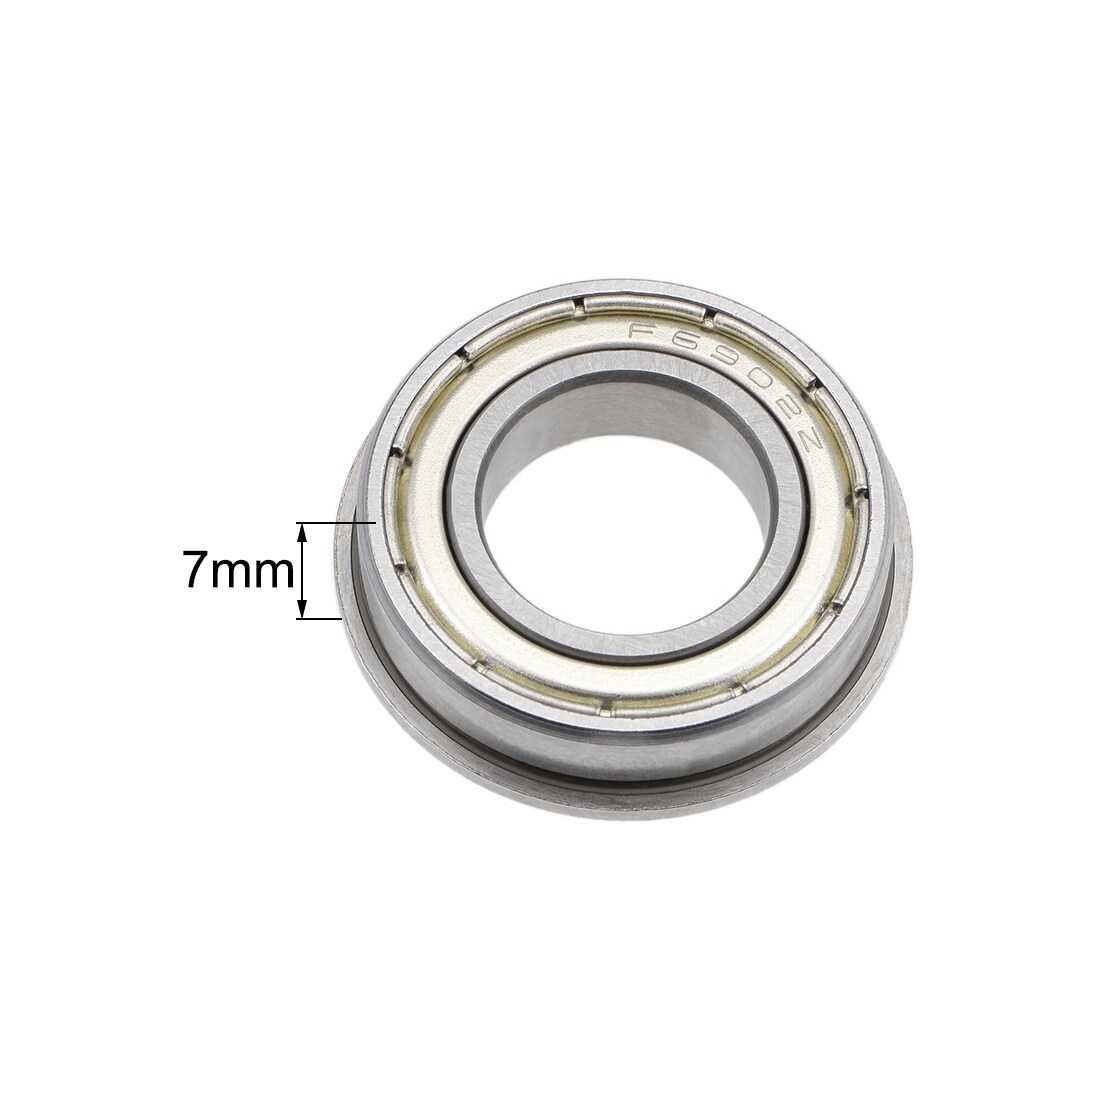 6mm*17mm*6mm 5 x F606zz Metal Double Shielded  Flanged  Ball Bearings